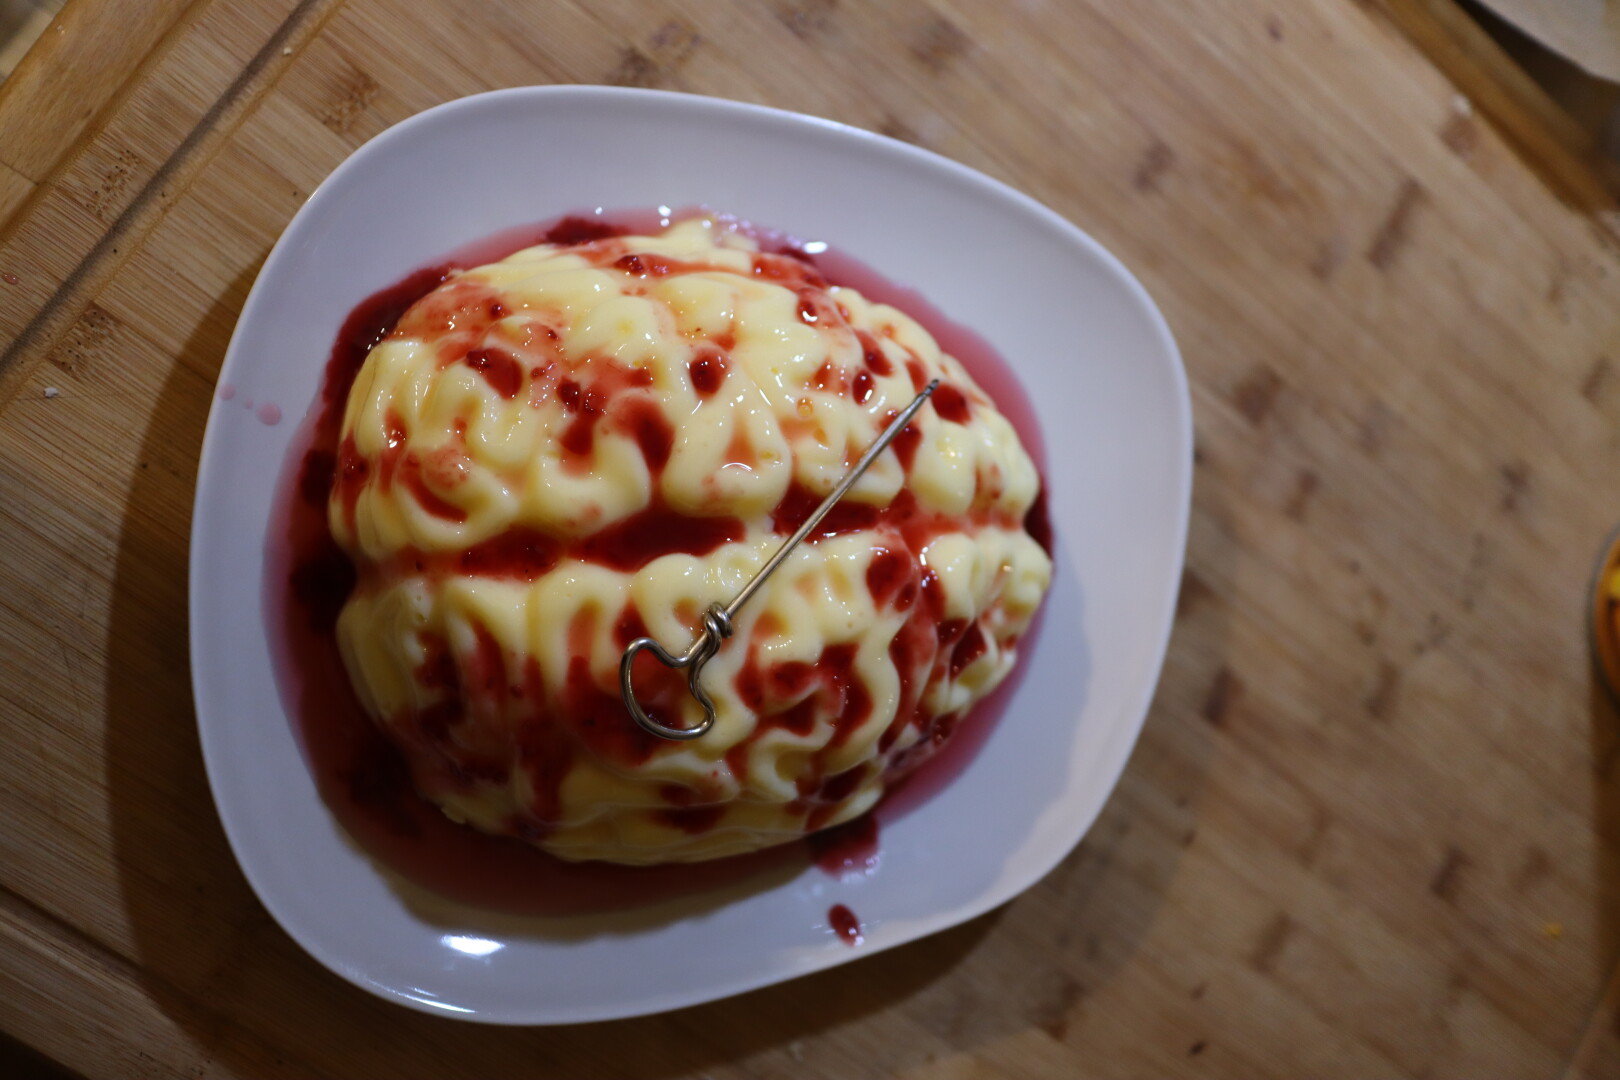 vanilla pudding in the shape of a brain with red syrup poured over. A drill placed across it